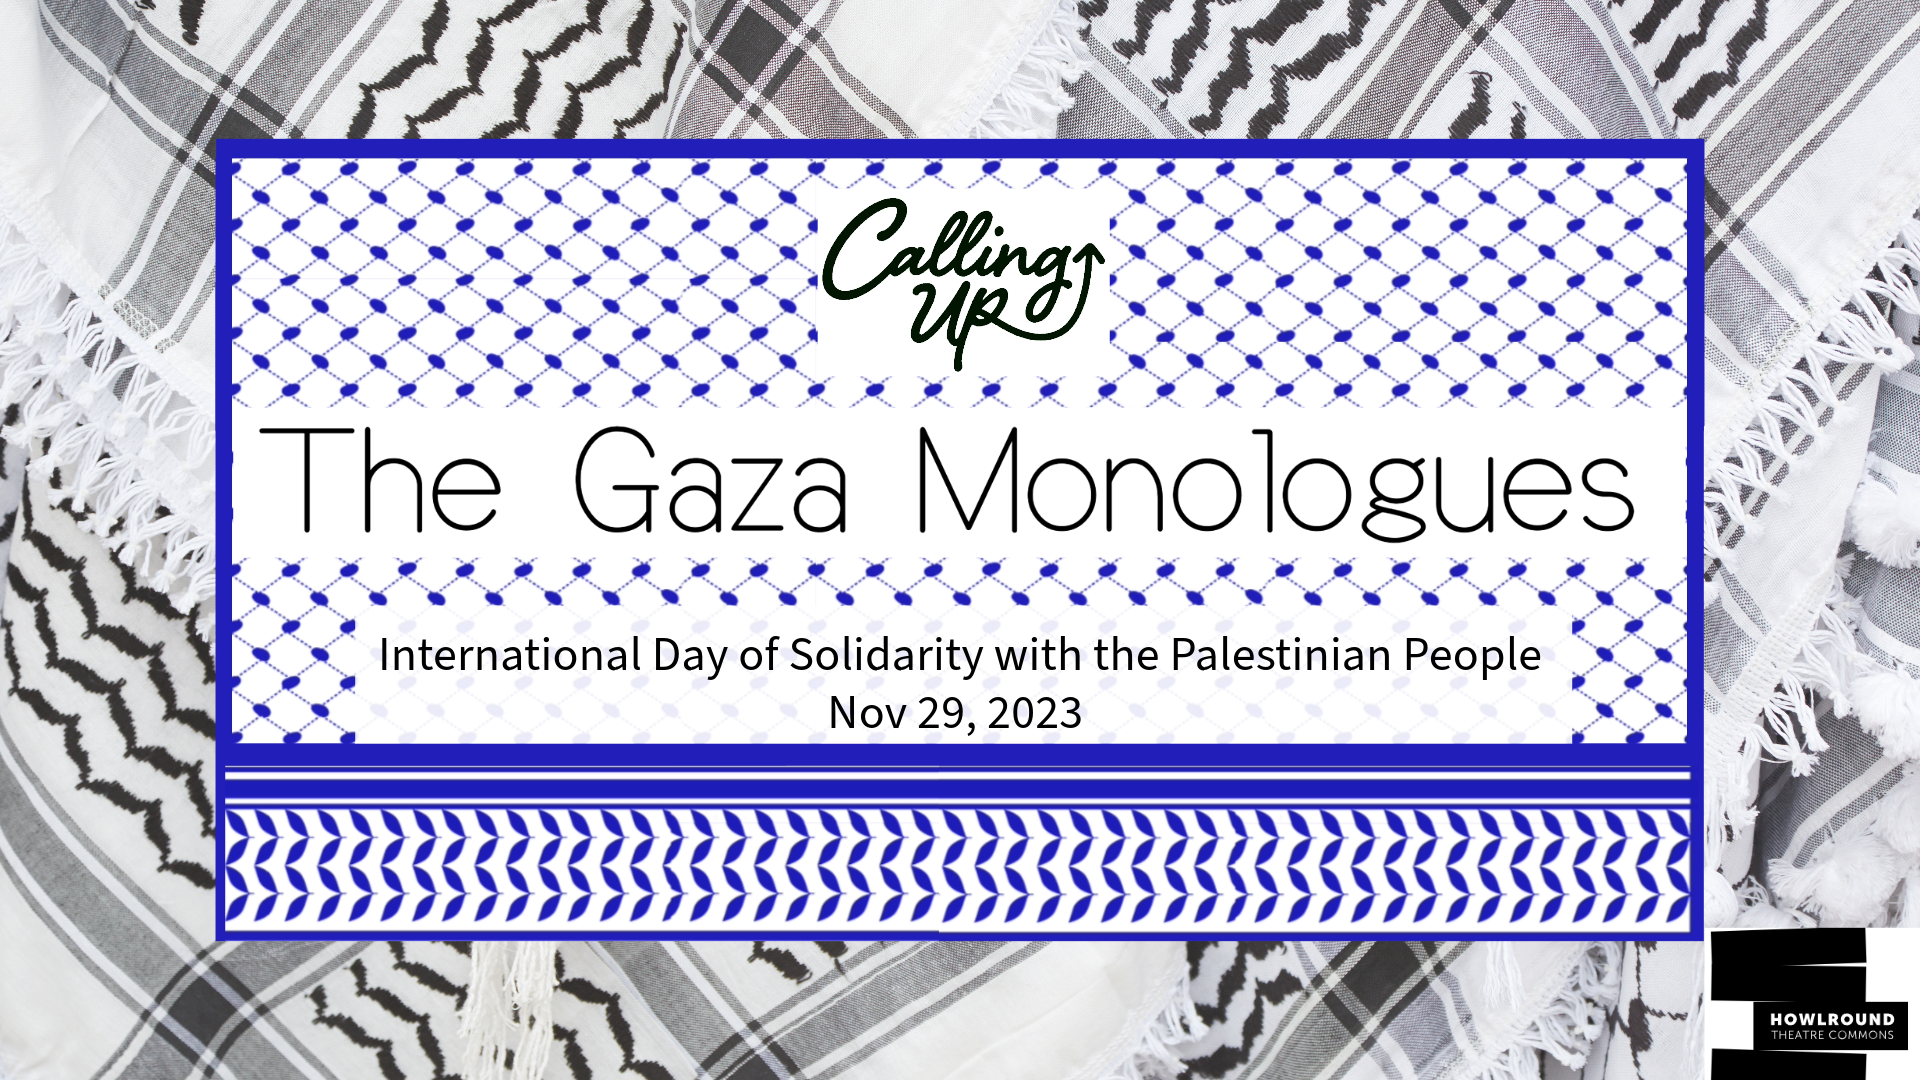 Kufiya Black and white background with overlay of blue Kufiya. On top reads "The Gaza Monologues" With the Calling Up Justice Logo on top and below it reads "international day of solidarity with the Palestinian People"